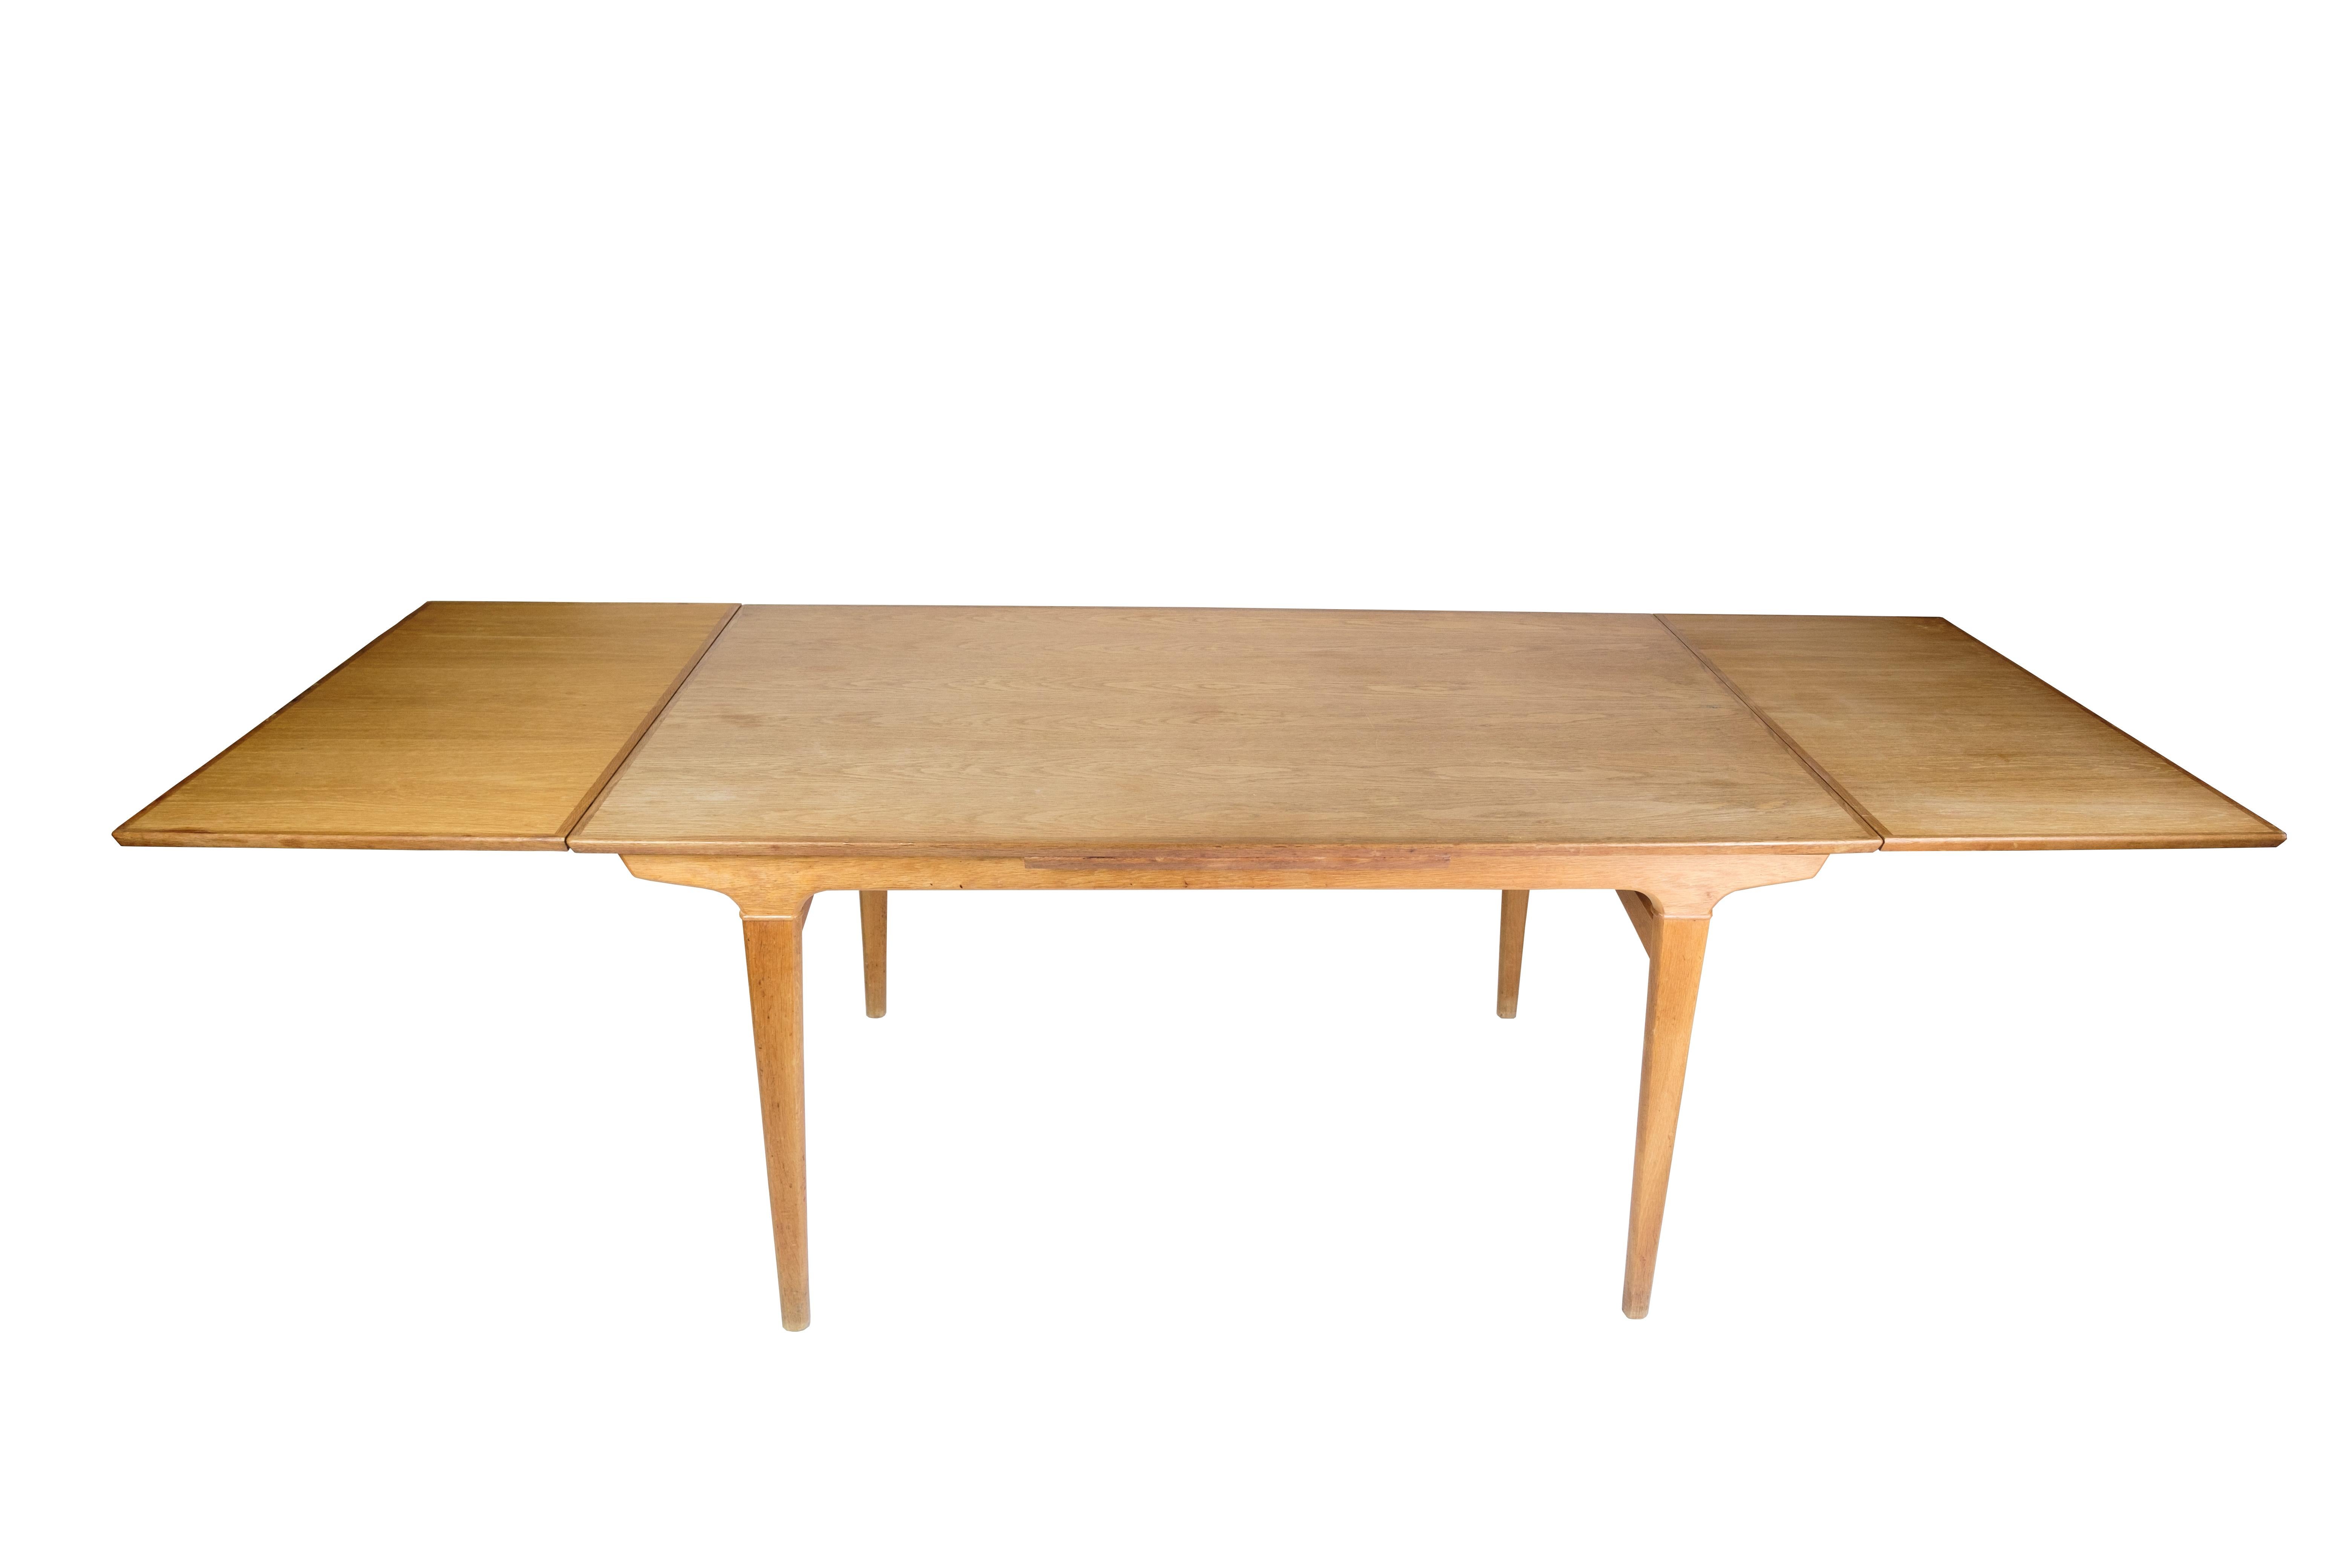 Mid-Century Modern Dining Room Table Made In Oak By Johannes Andersen From 1960s For Sale